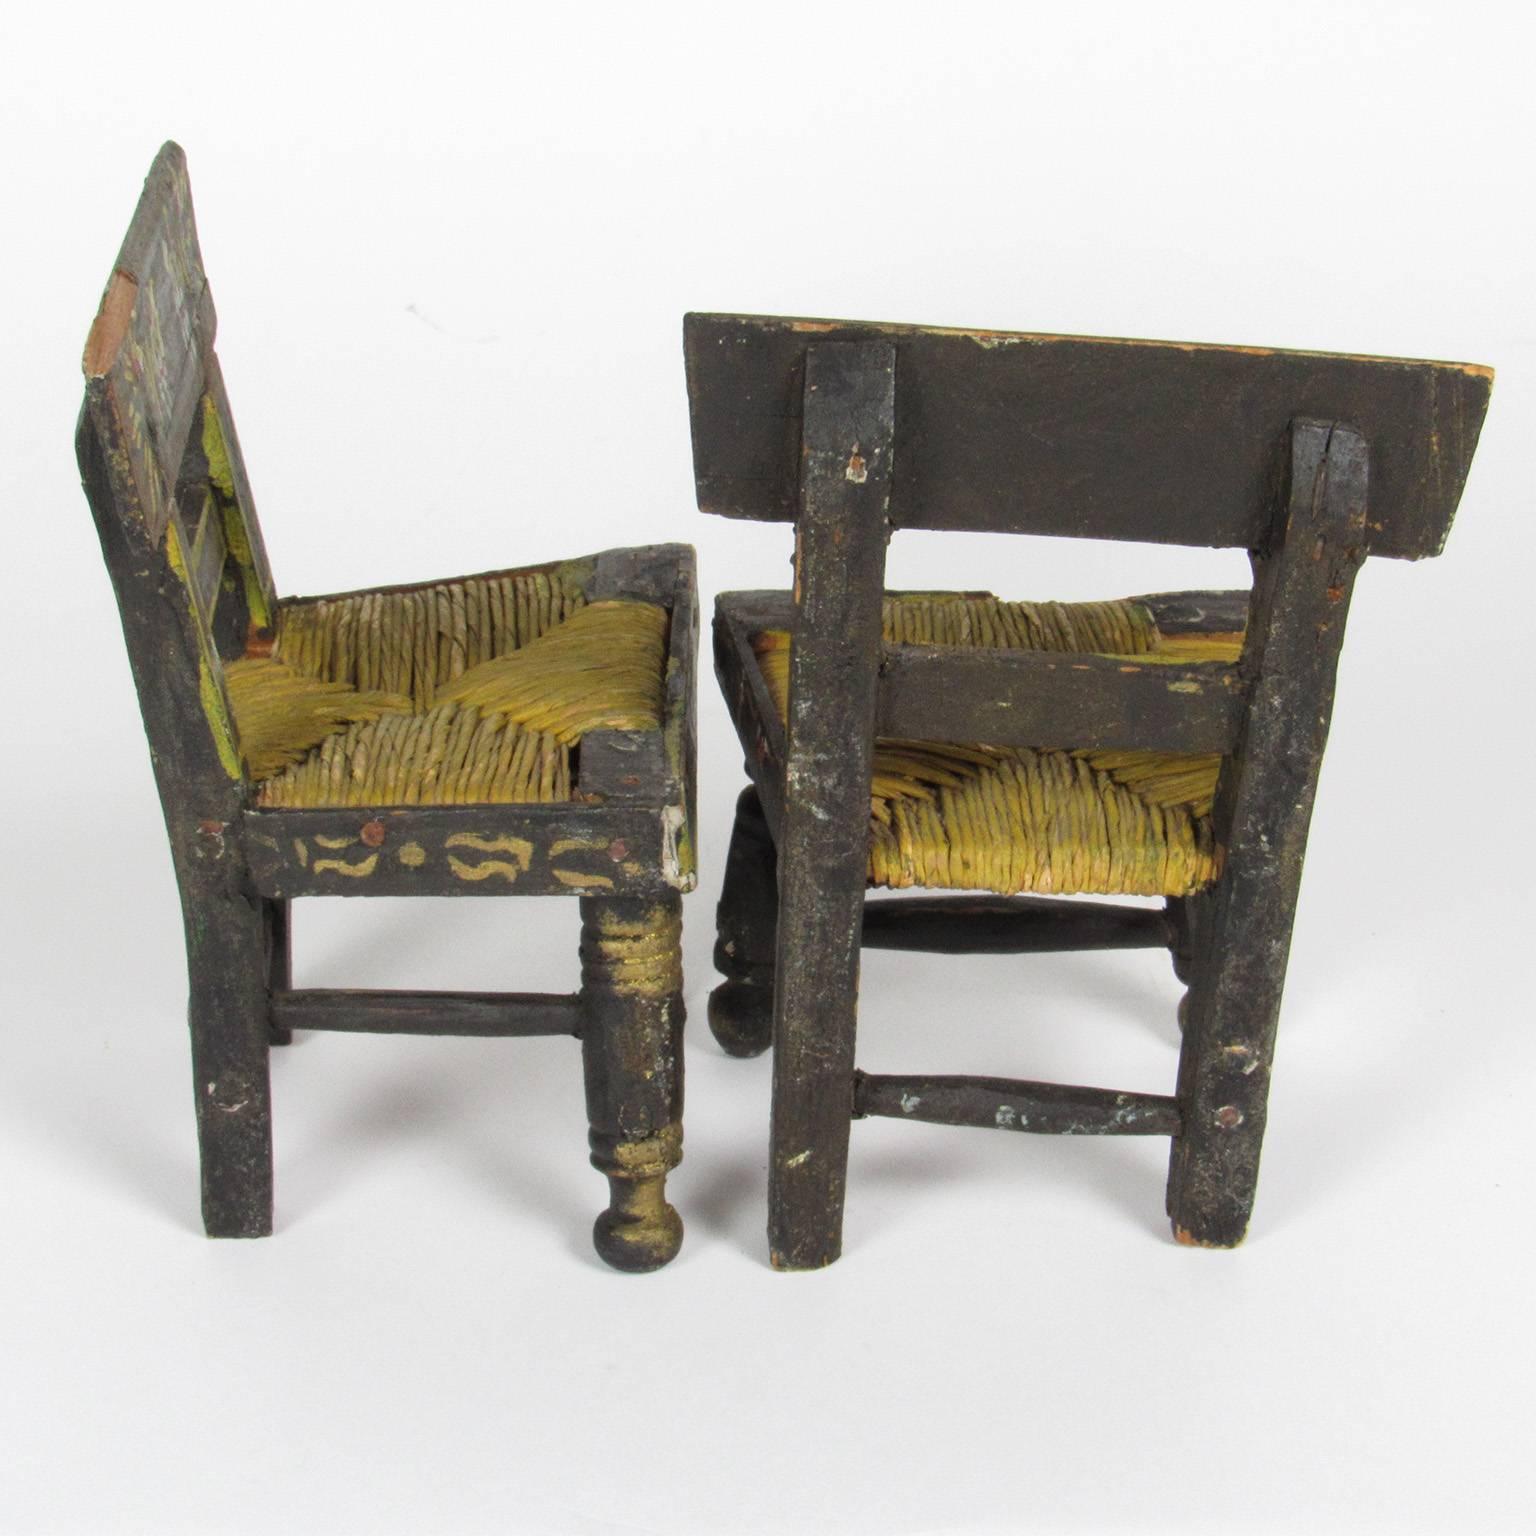 Pair of antique miniature hand-painted Hitchcock style chairs. Black painted with rush seats, these miniature chairs are adorable! Dimensions: 5 3/4 x 3 3/4 x 3 inches.